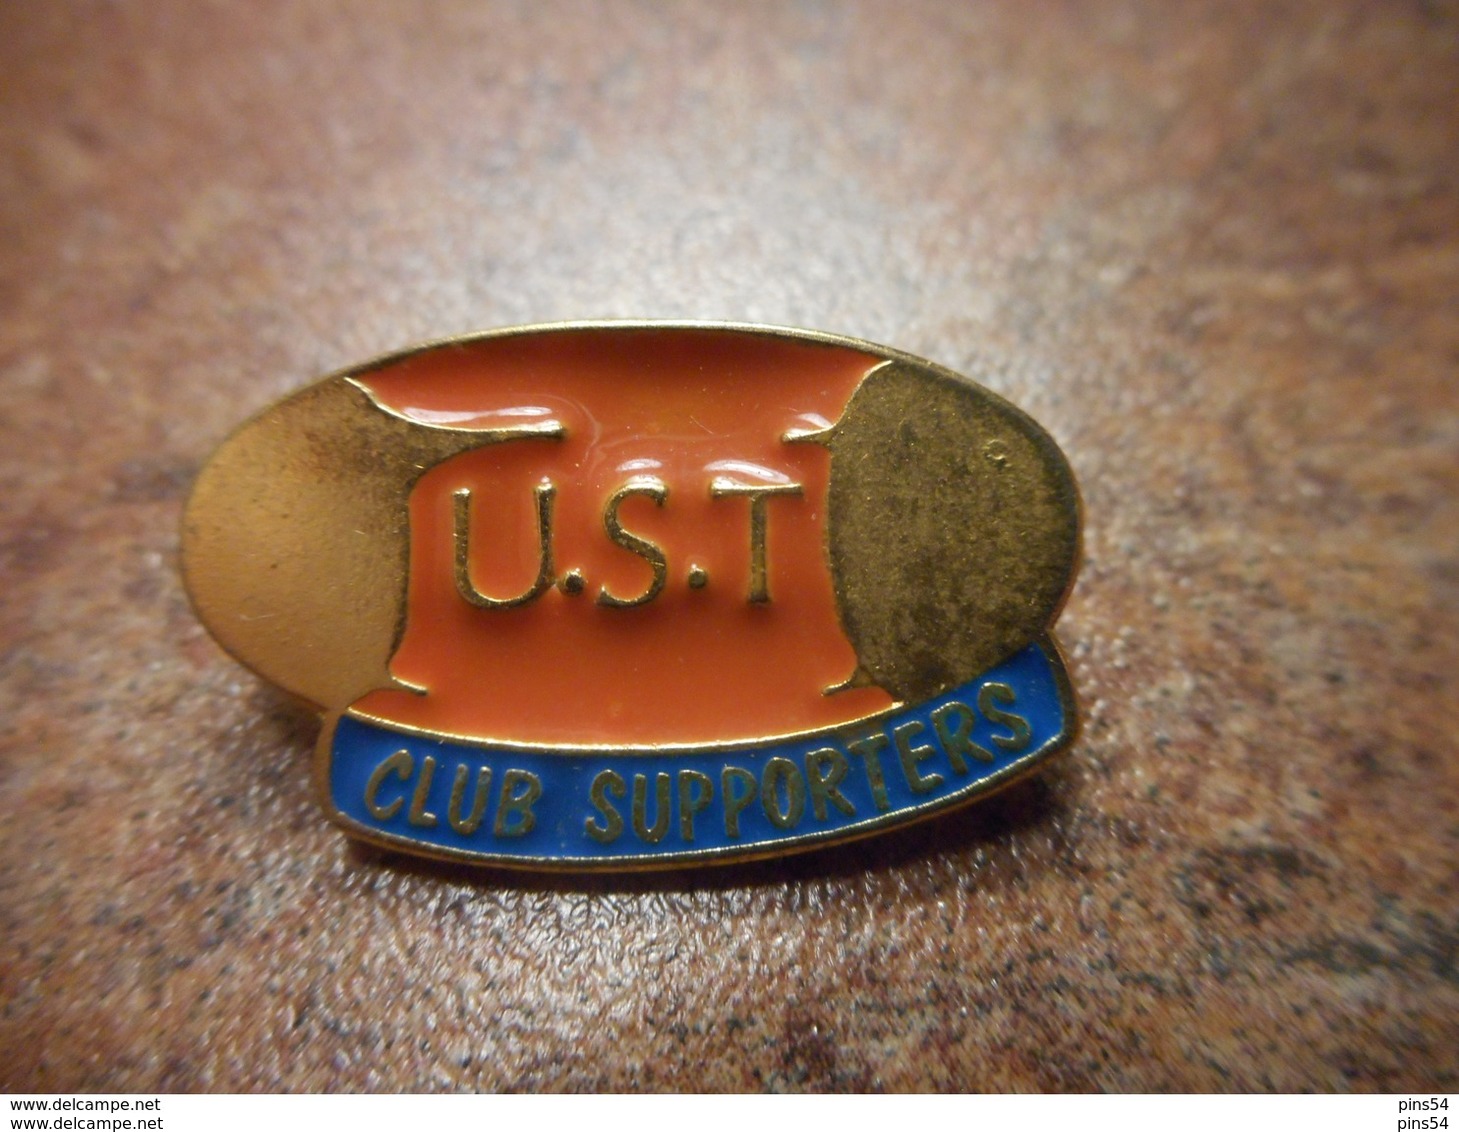 A031 -- Pin's UST Club Supporters - Rugby